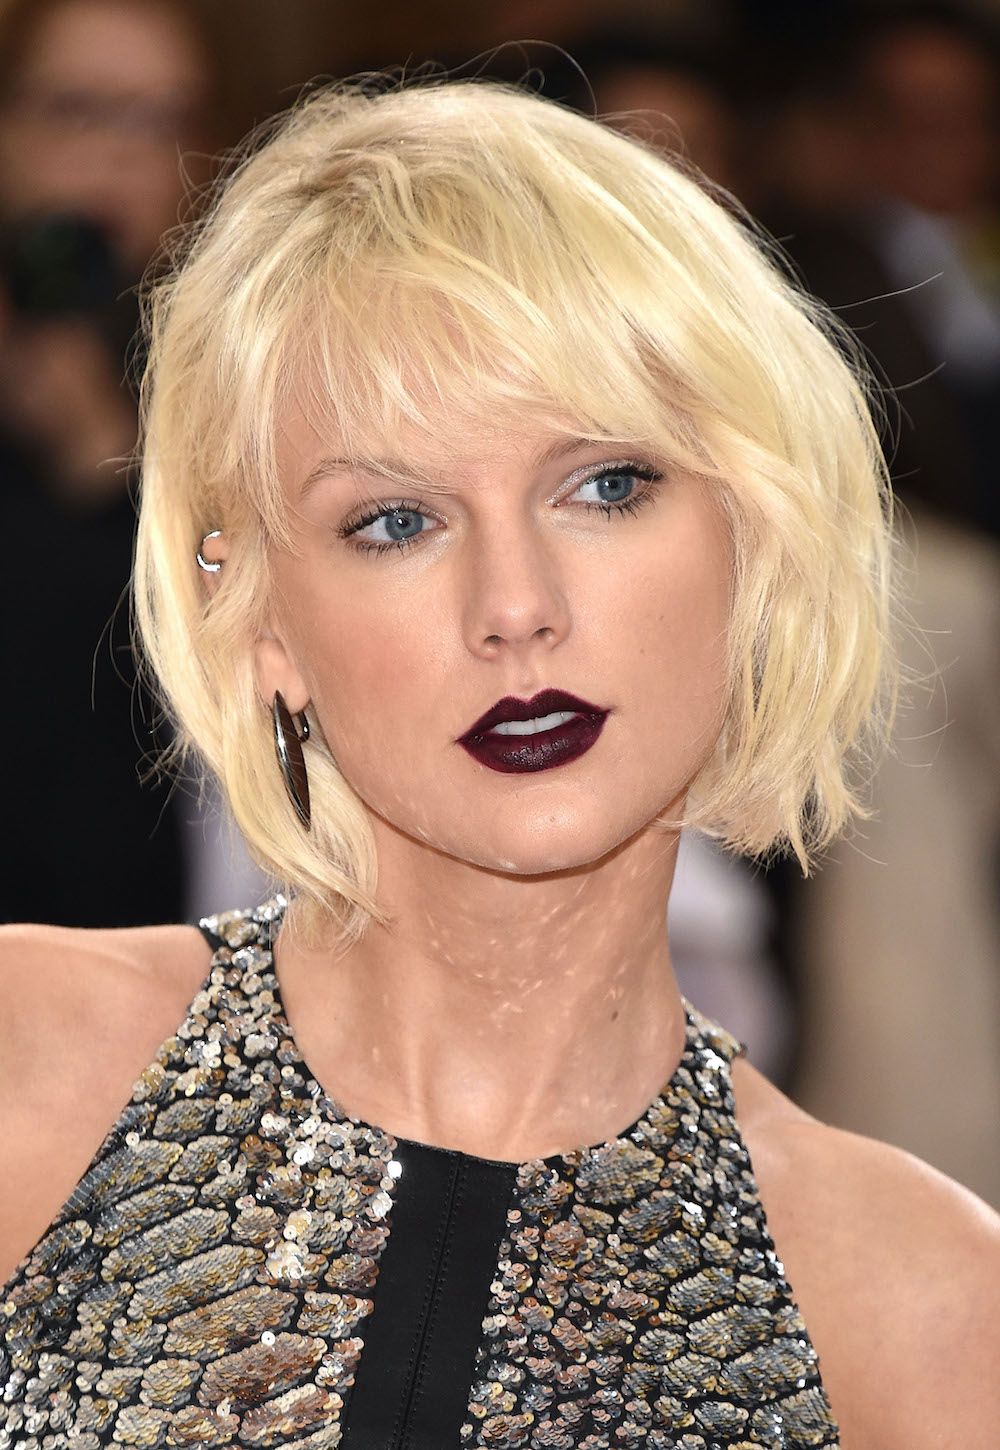 <p>                     This make-up look seen on Taylor Swift at the 2016 Met Gala was an incredibly striking one thanks to the ultra dark rouge noir lip. For maximum impact, the rest of her look was quite pared back with subtle sparkles on the eyes and just a little mascara.                   </p>